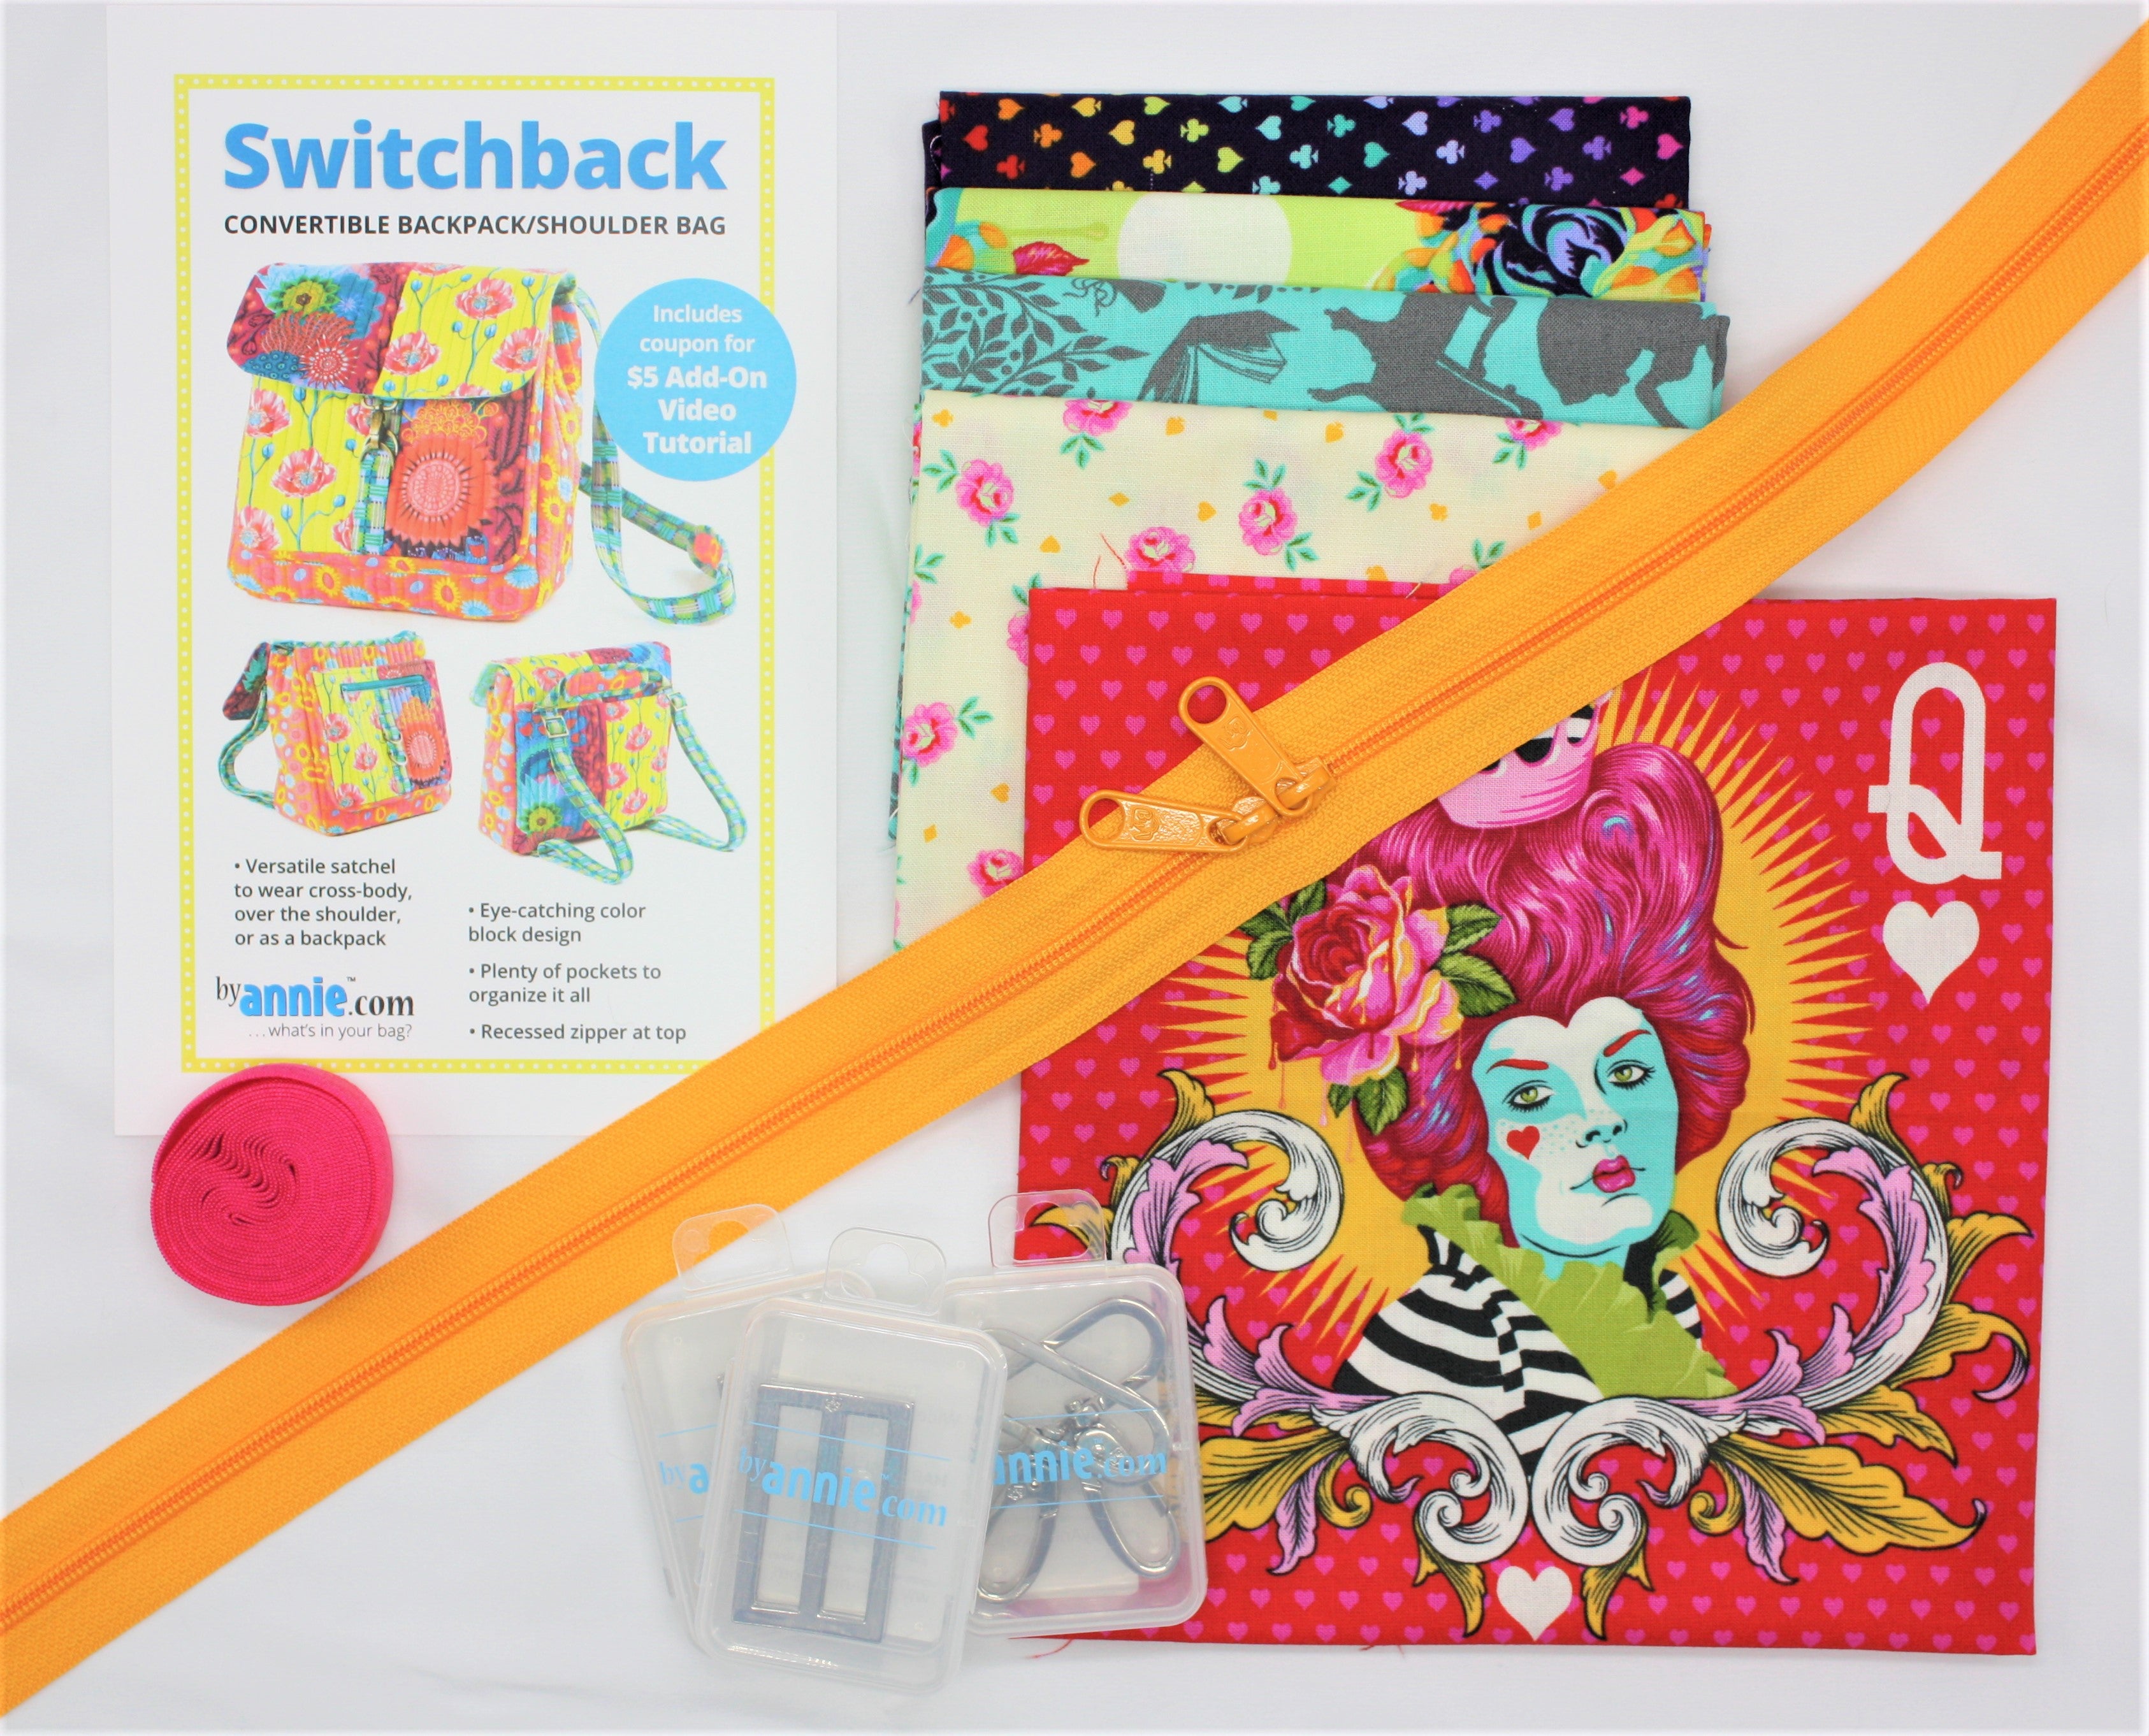 ByAnnie.com and Patterns By Annie - Switchback is our fun-to-sew